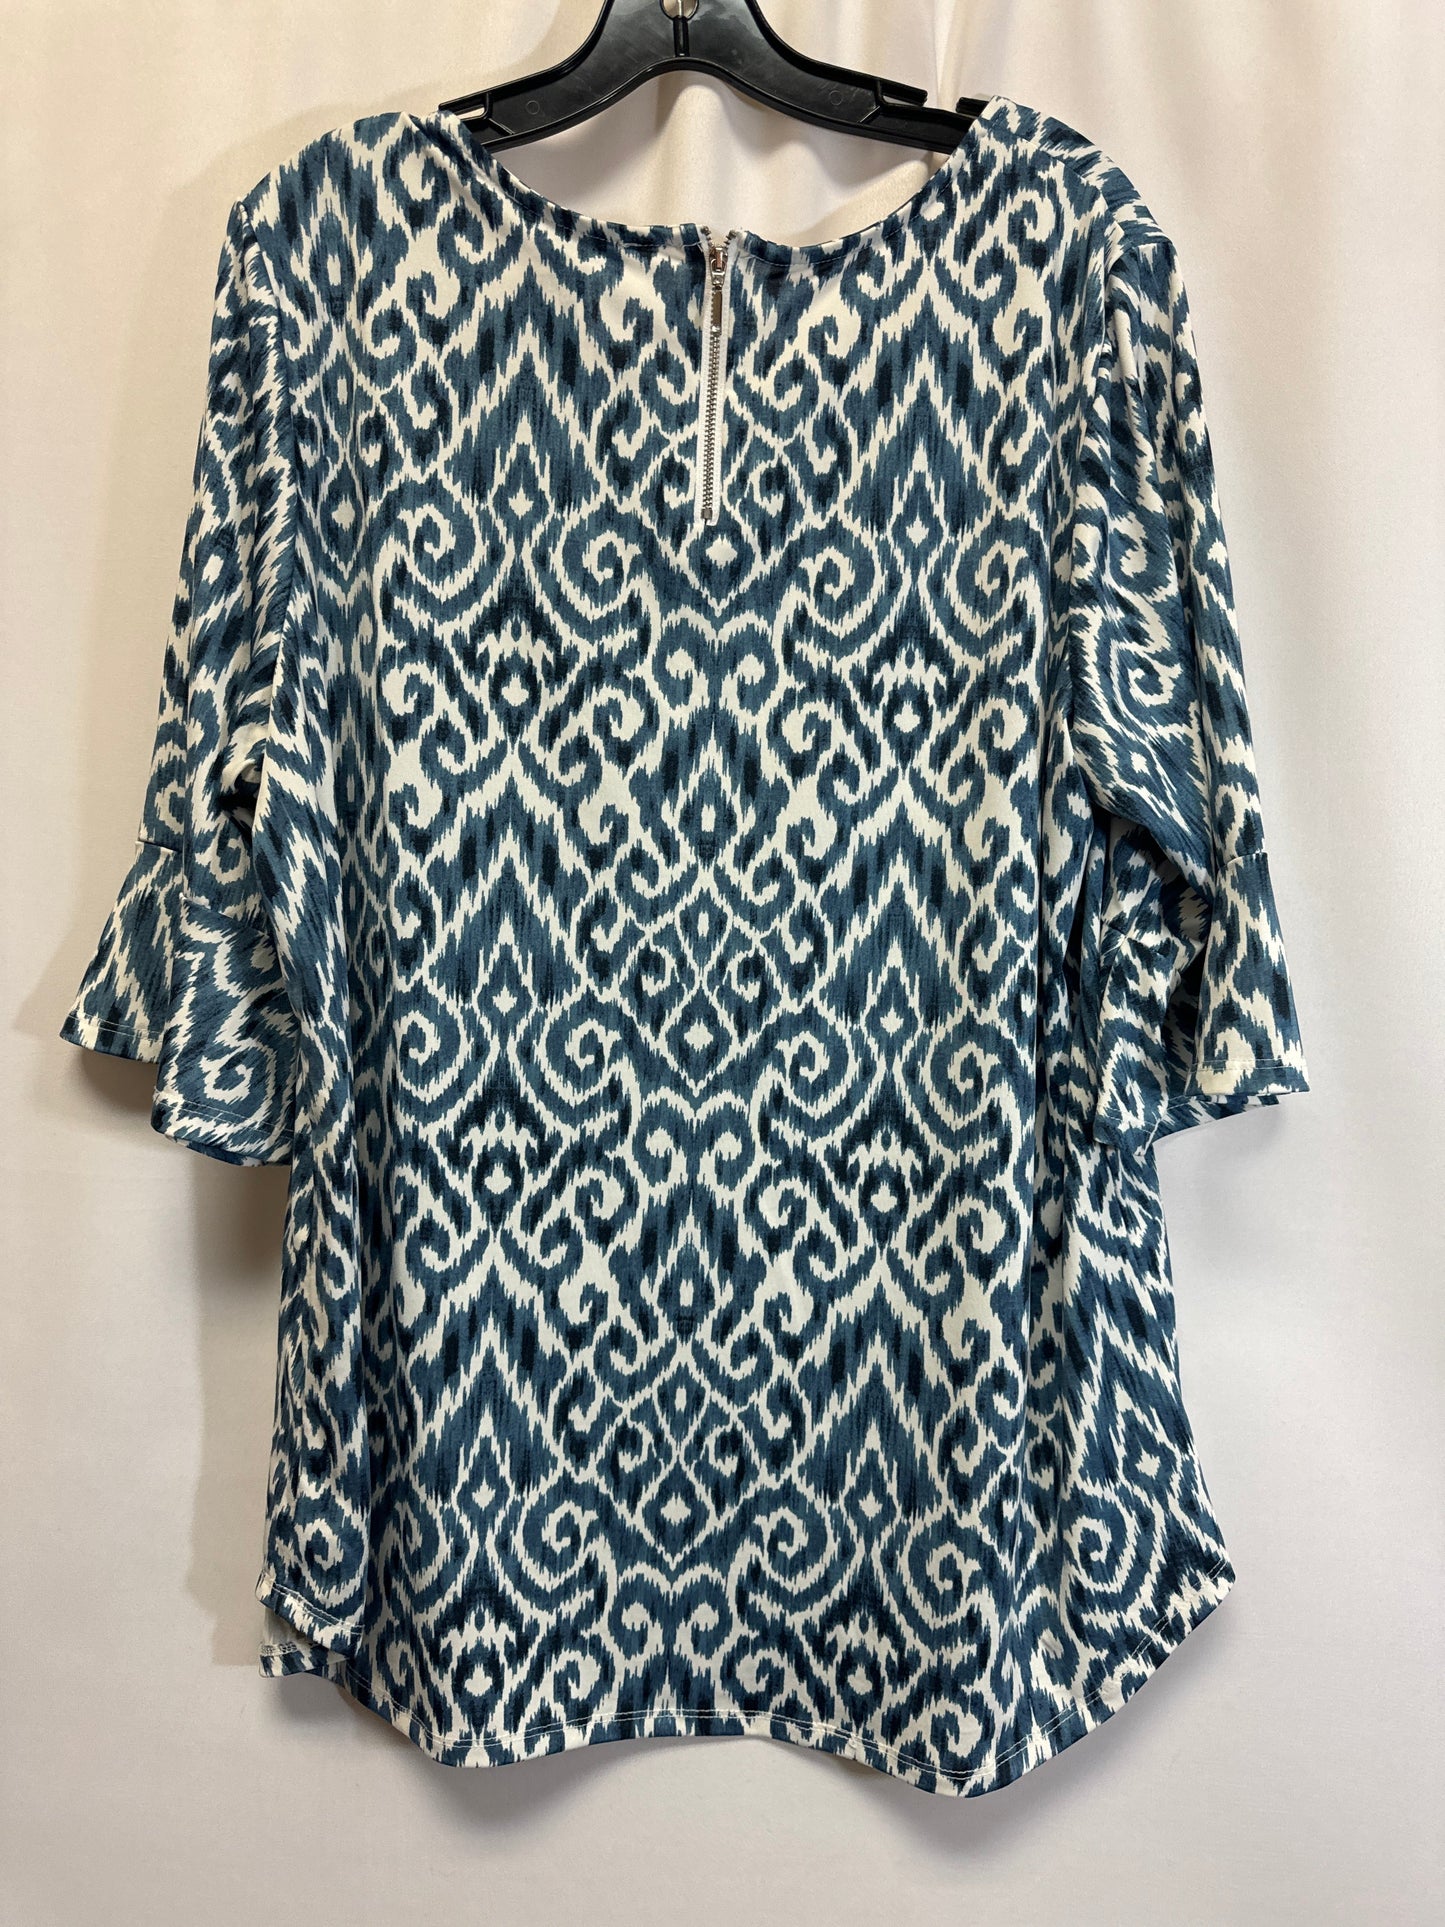 Blue & White Top Short Sleeve Clothes Mentor, Size 2x